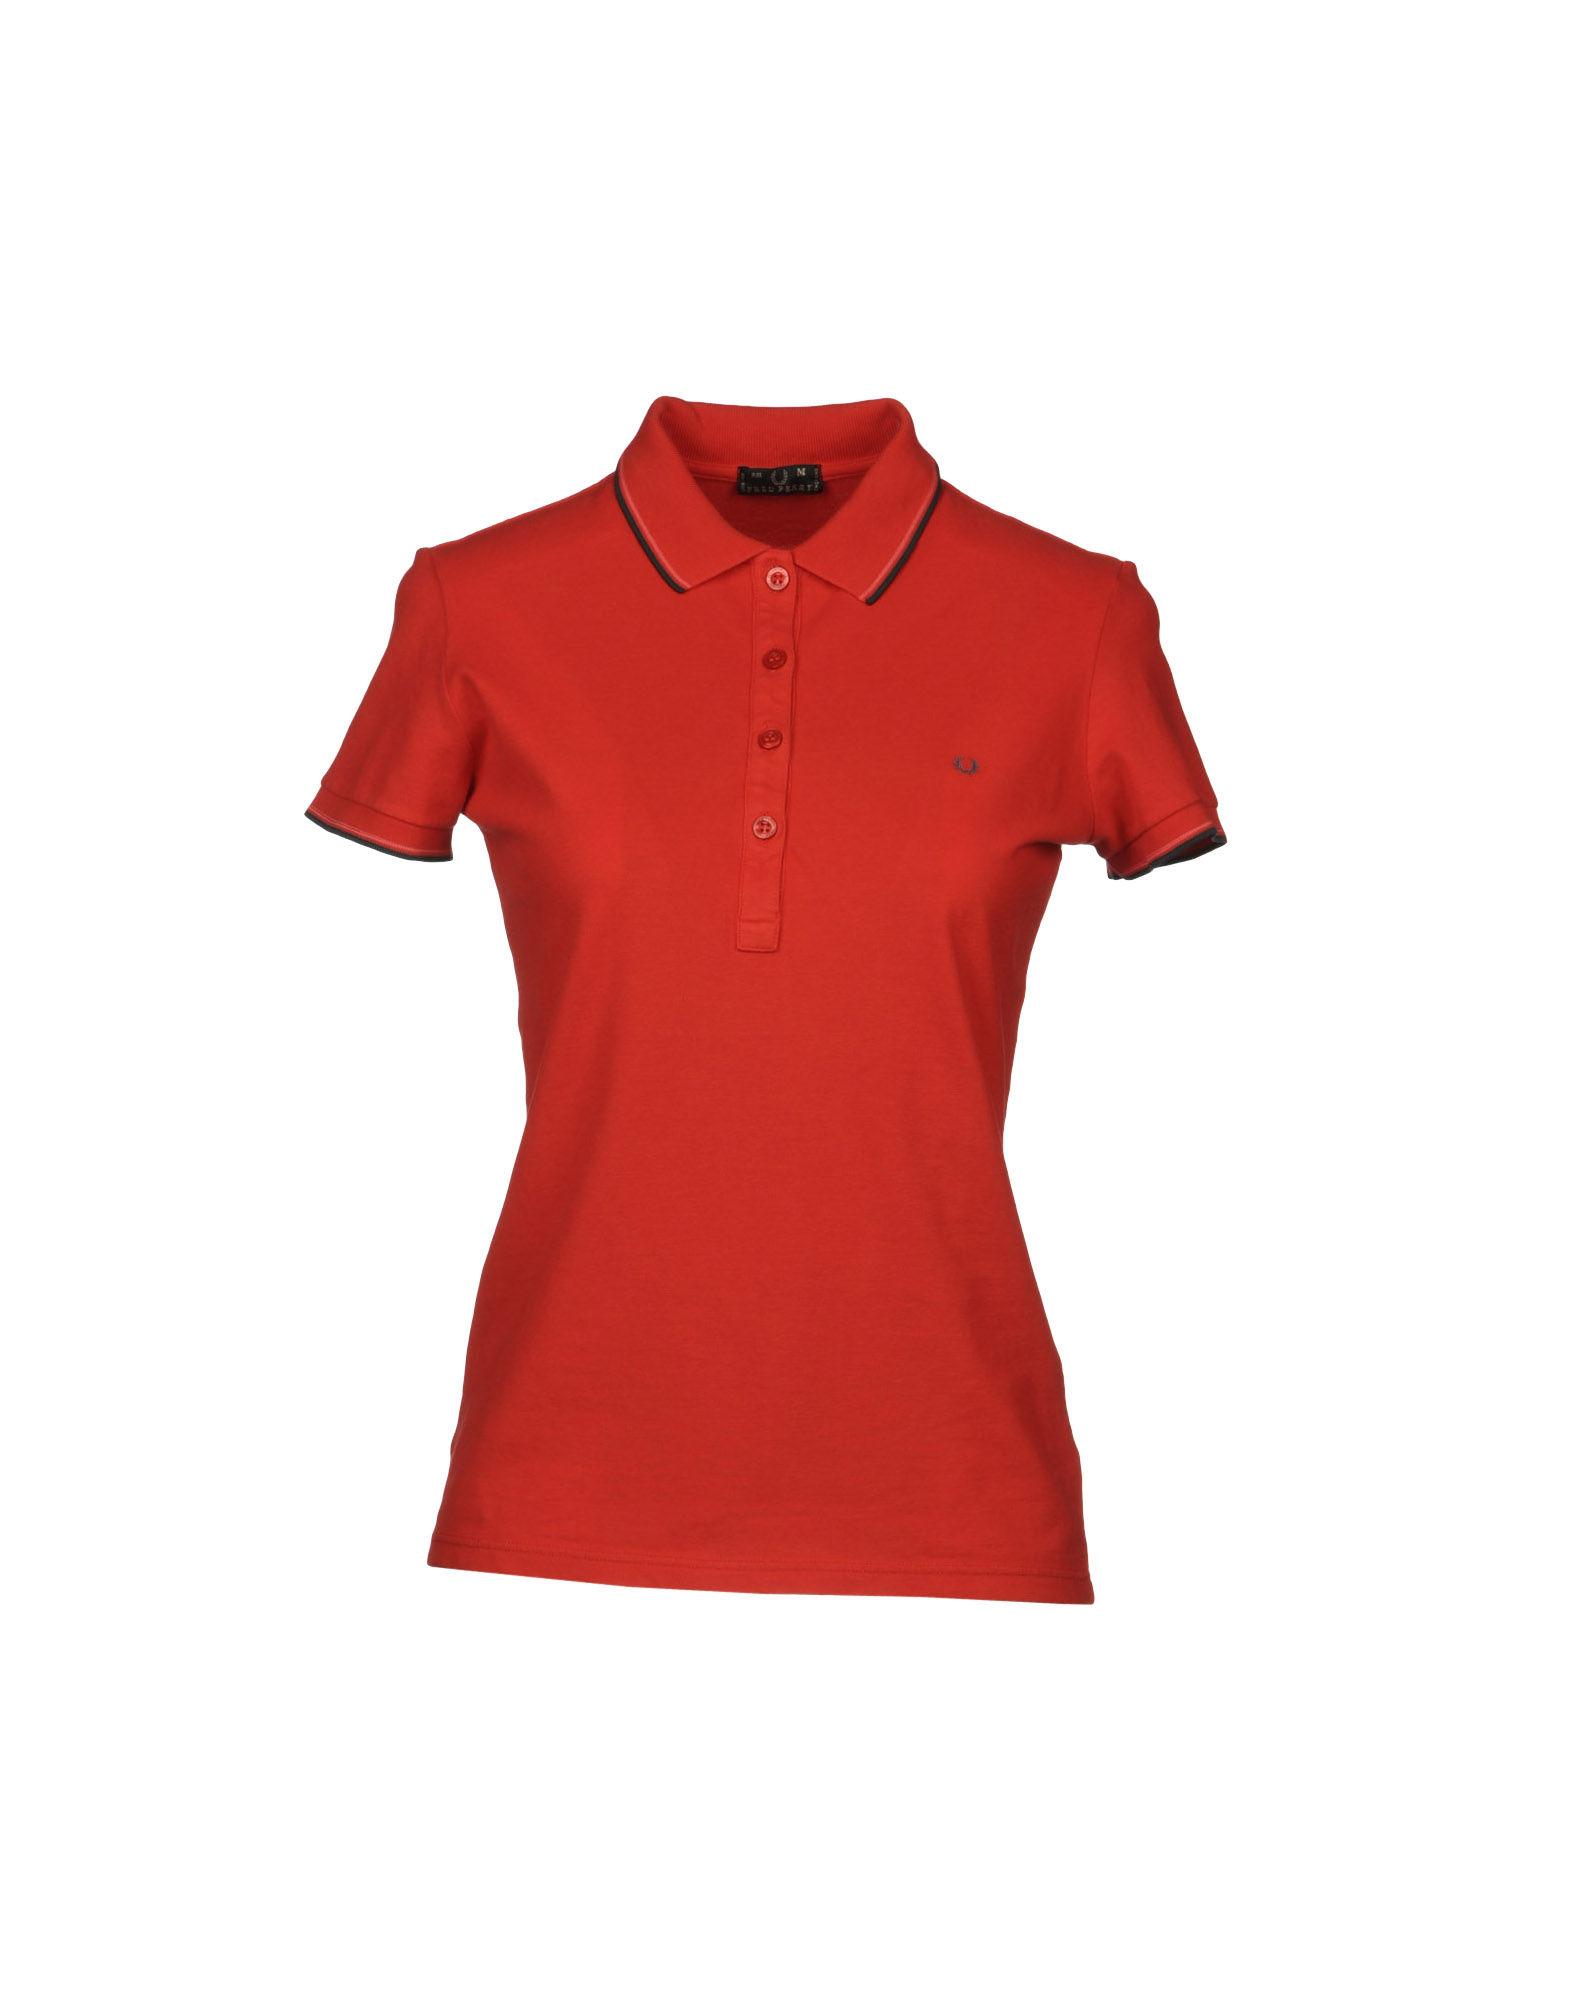 Foto fred perry polos
 foto 321550